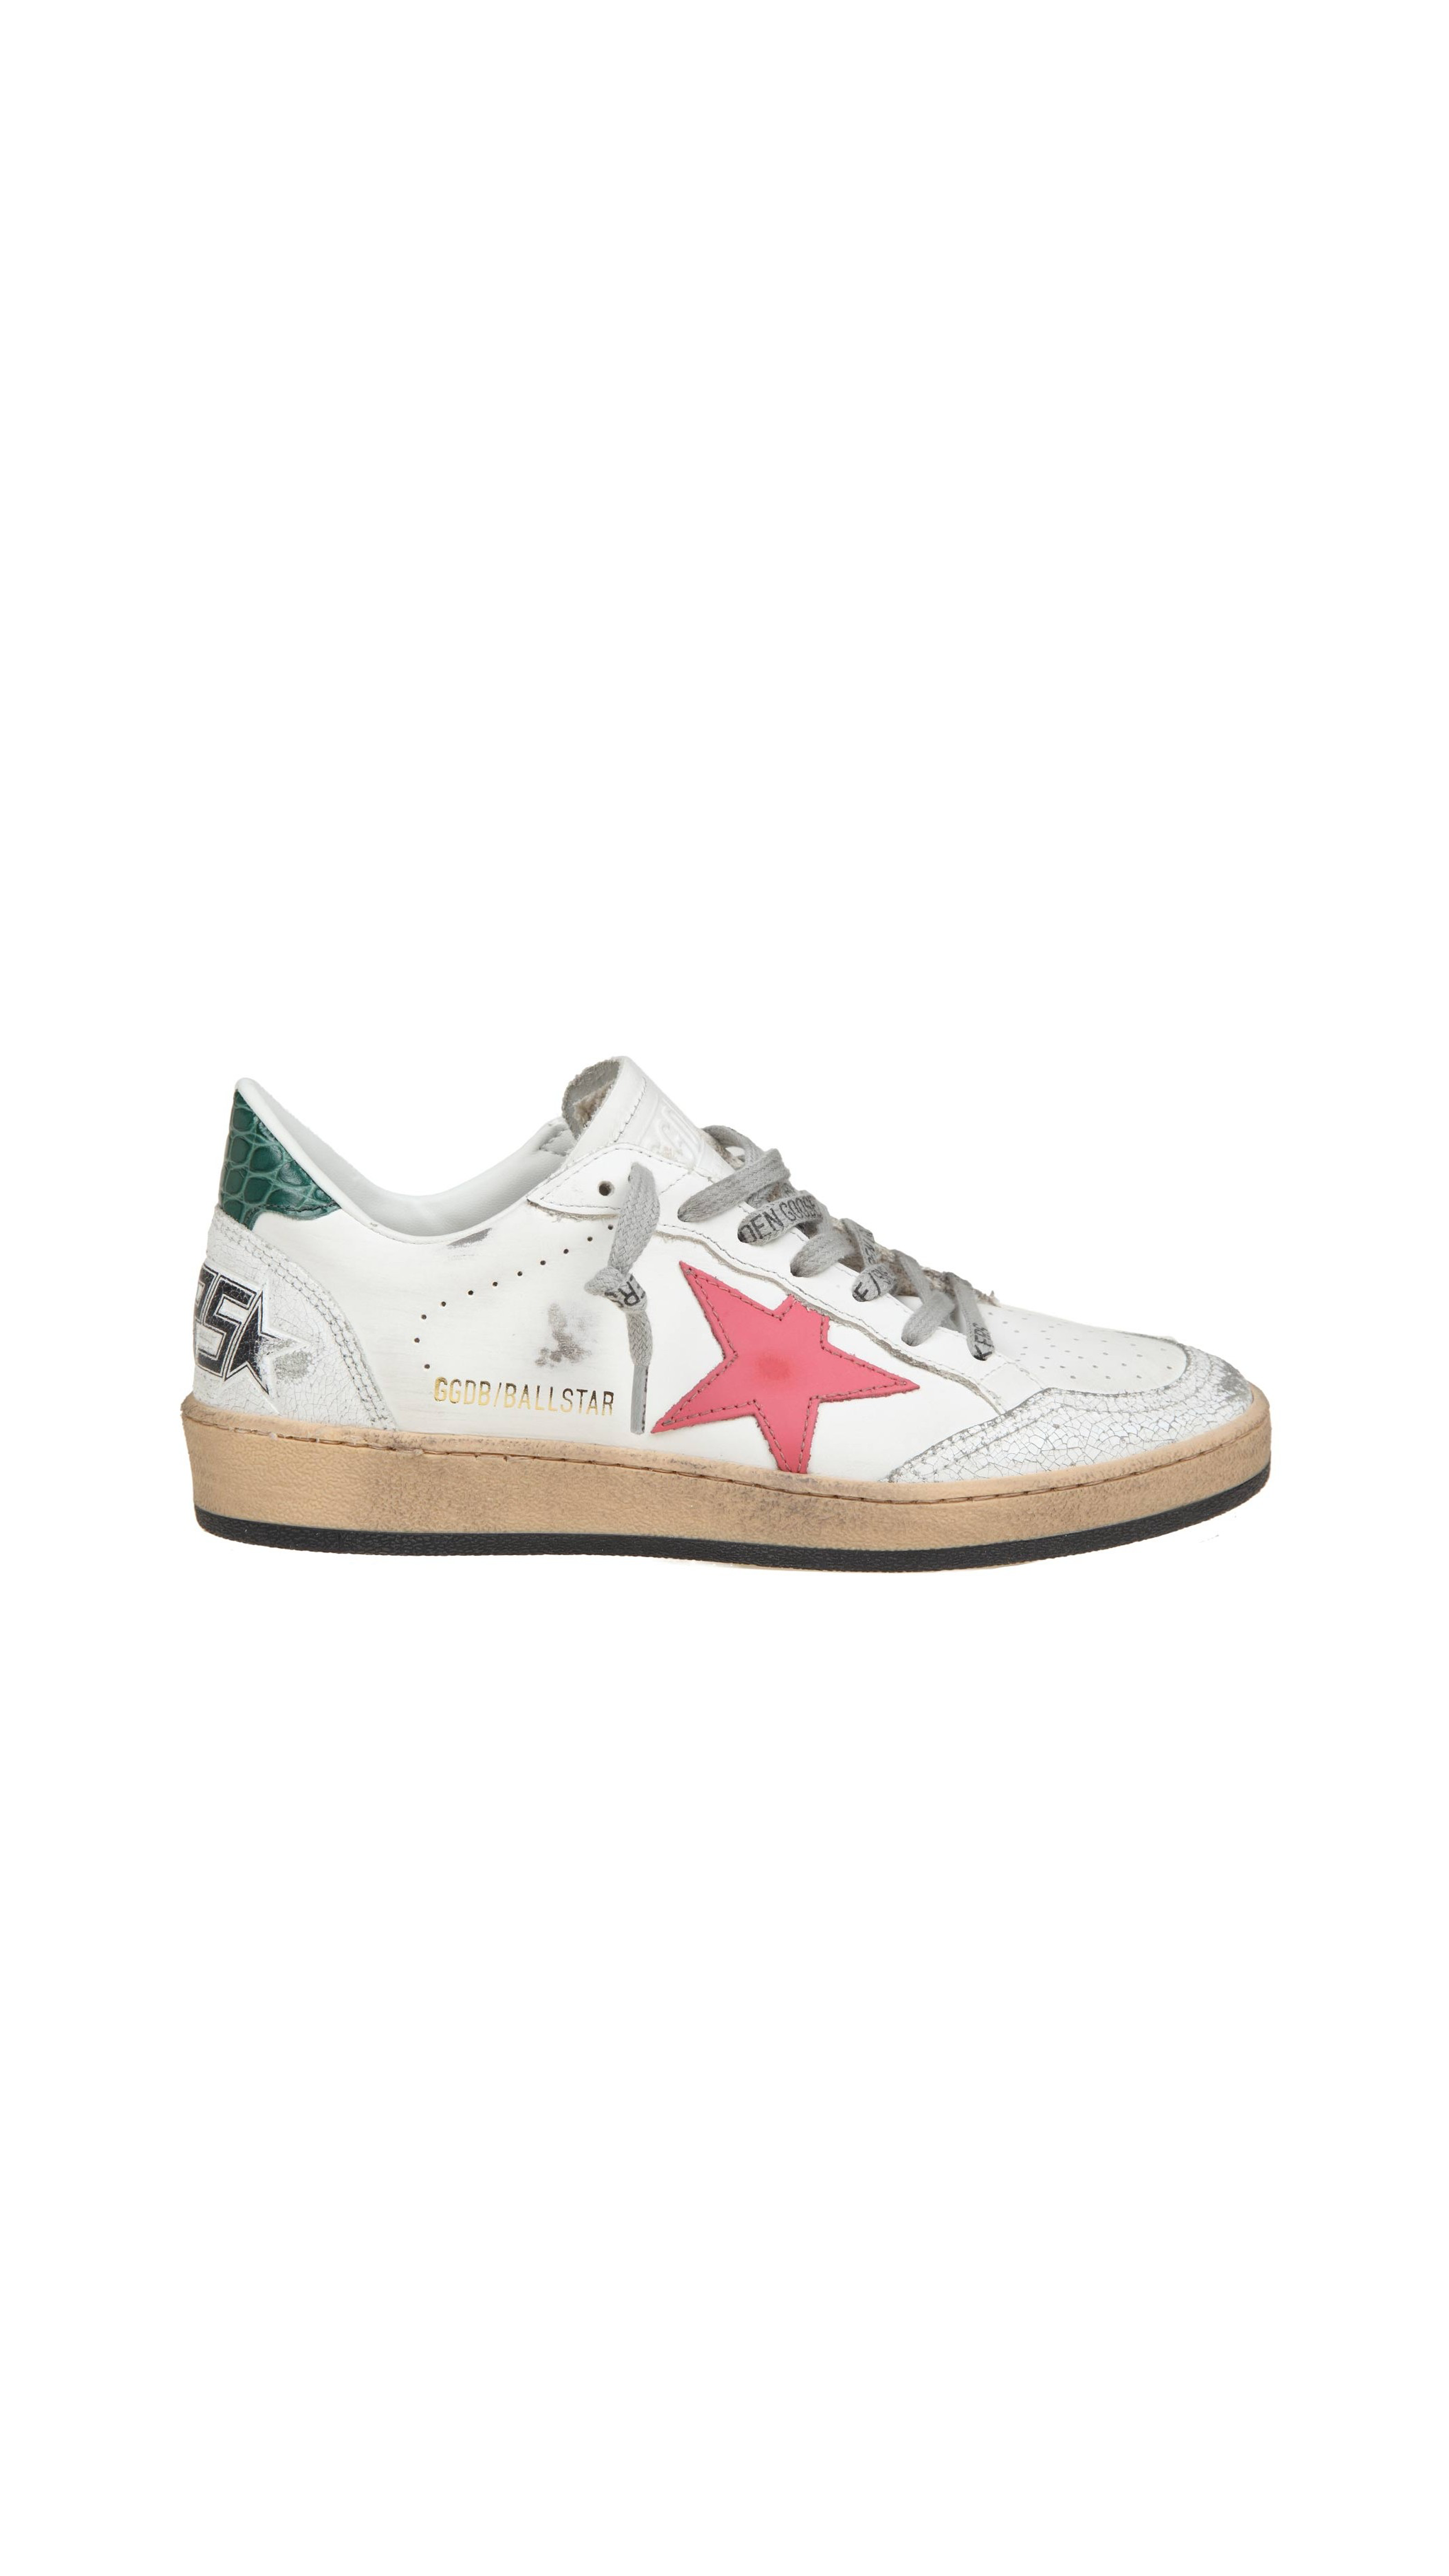 Ball Star Sneakers - White\Green\Pink